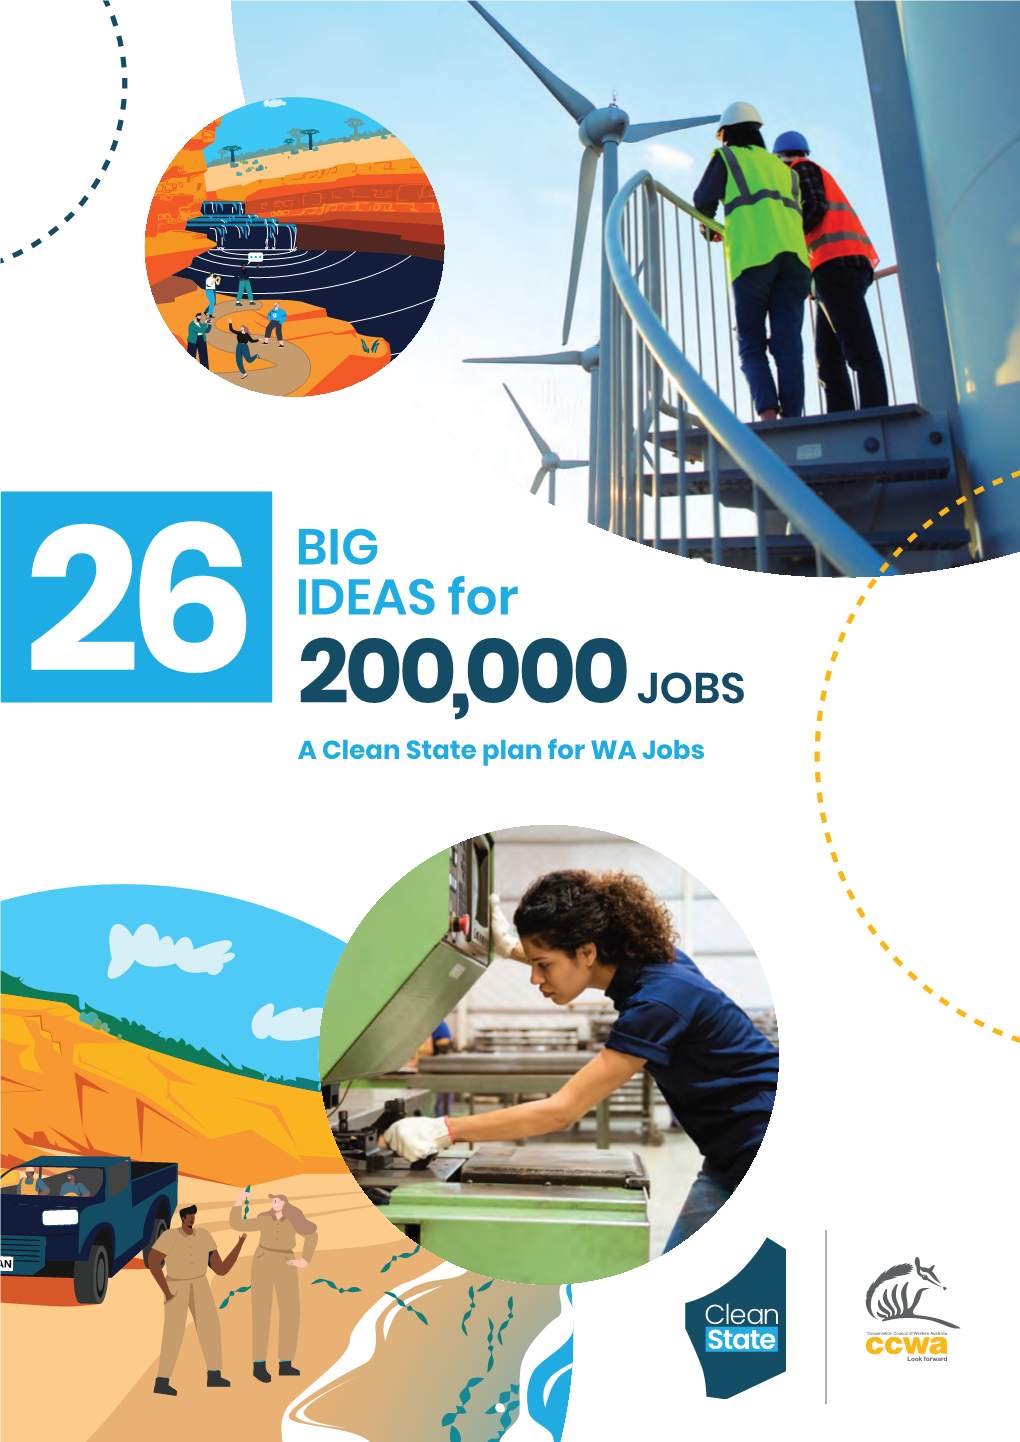 Clean State Jobs Plan 1 26 Big Ideas for 200,000 Jobs Big Ideas for 26 200,000 Jobs Overview